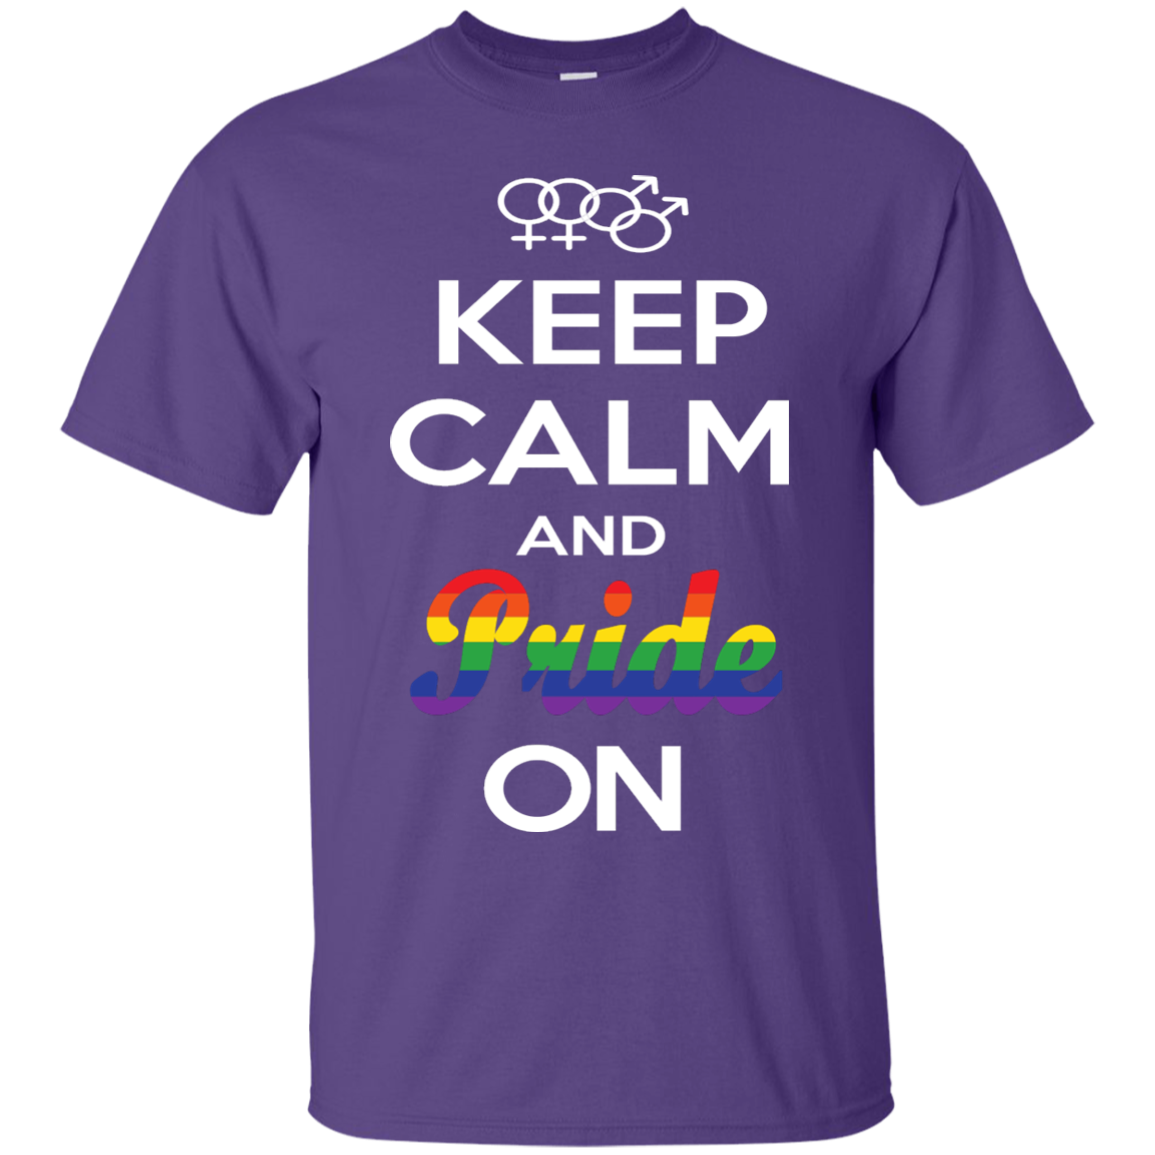 Keep Calm And Pride On